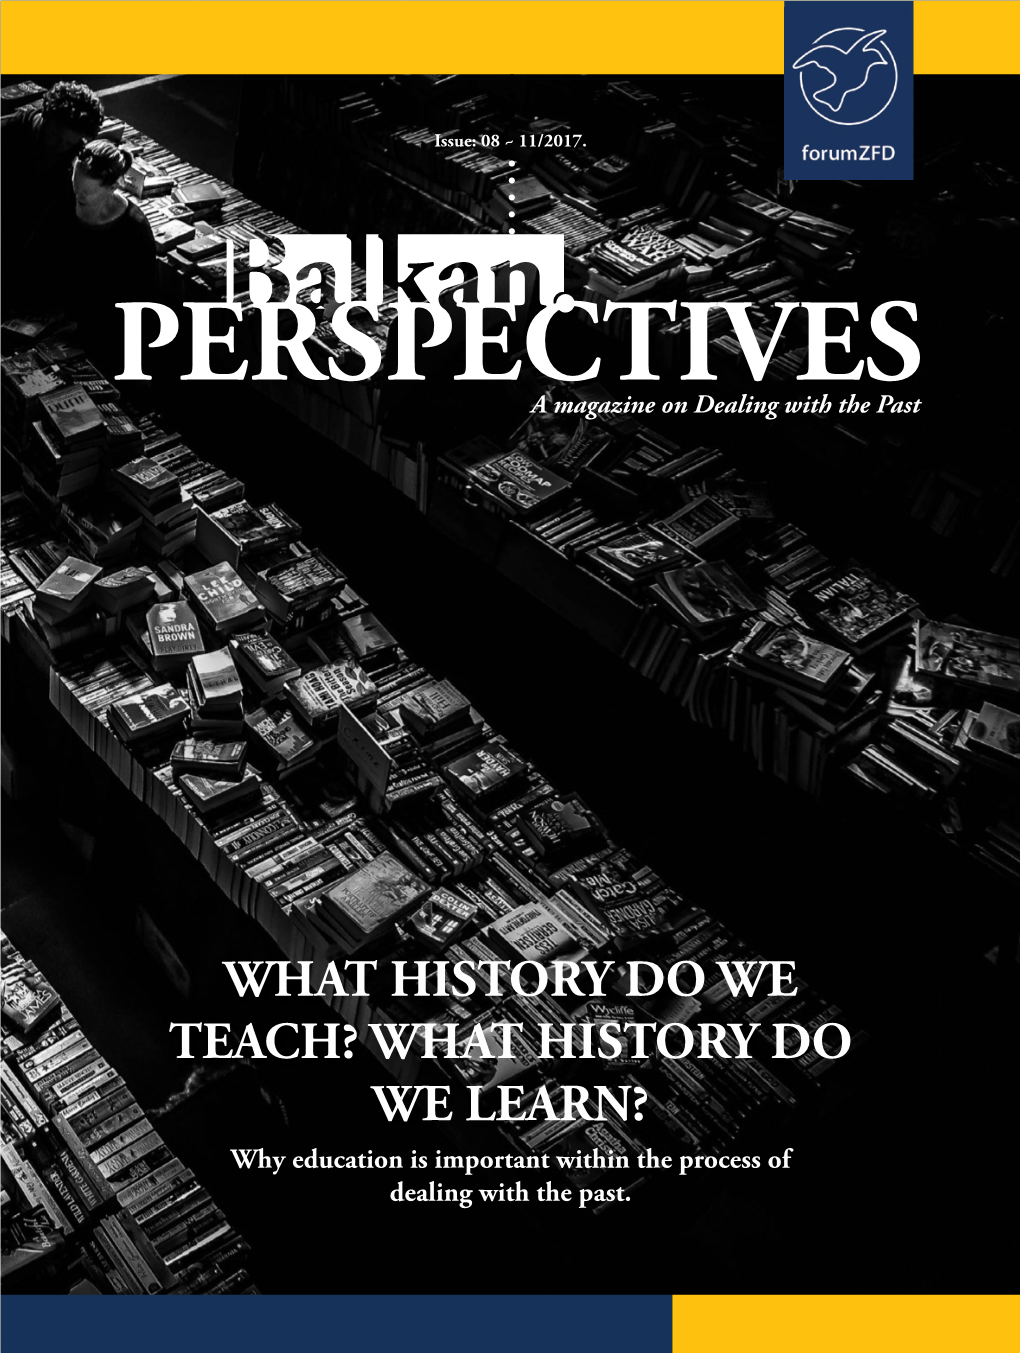 WHAT HISTORY DO WE TEACH? WHAT HISTORY DO WE LEARN? Why Education Is Important Within the Process of Dealing with the Past